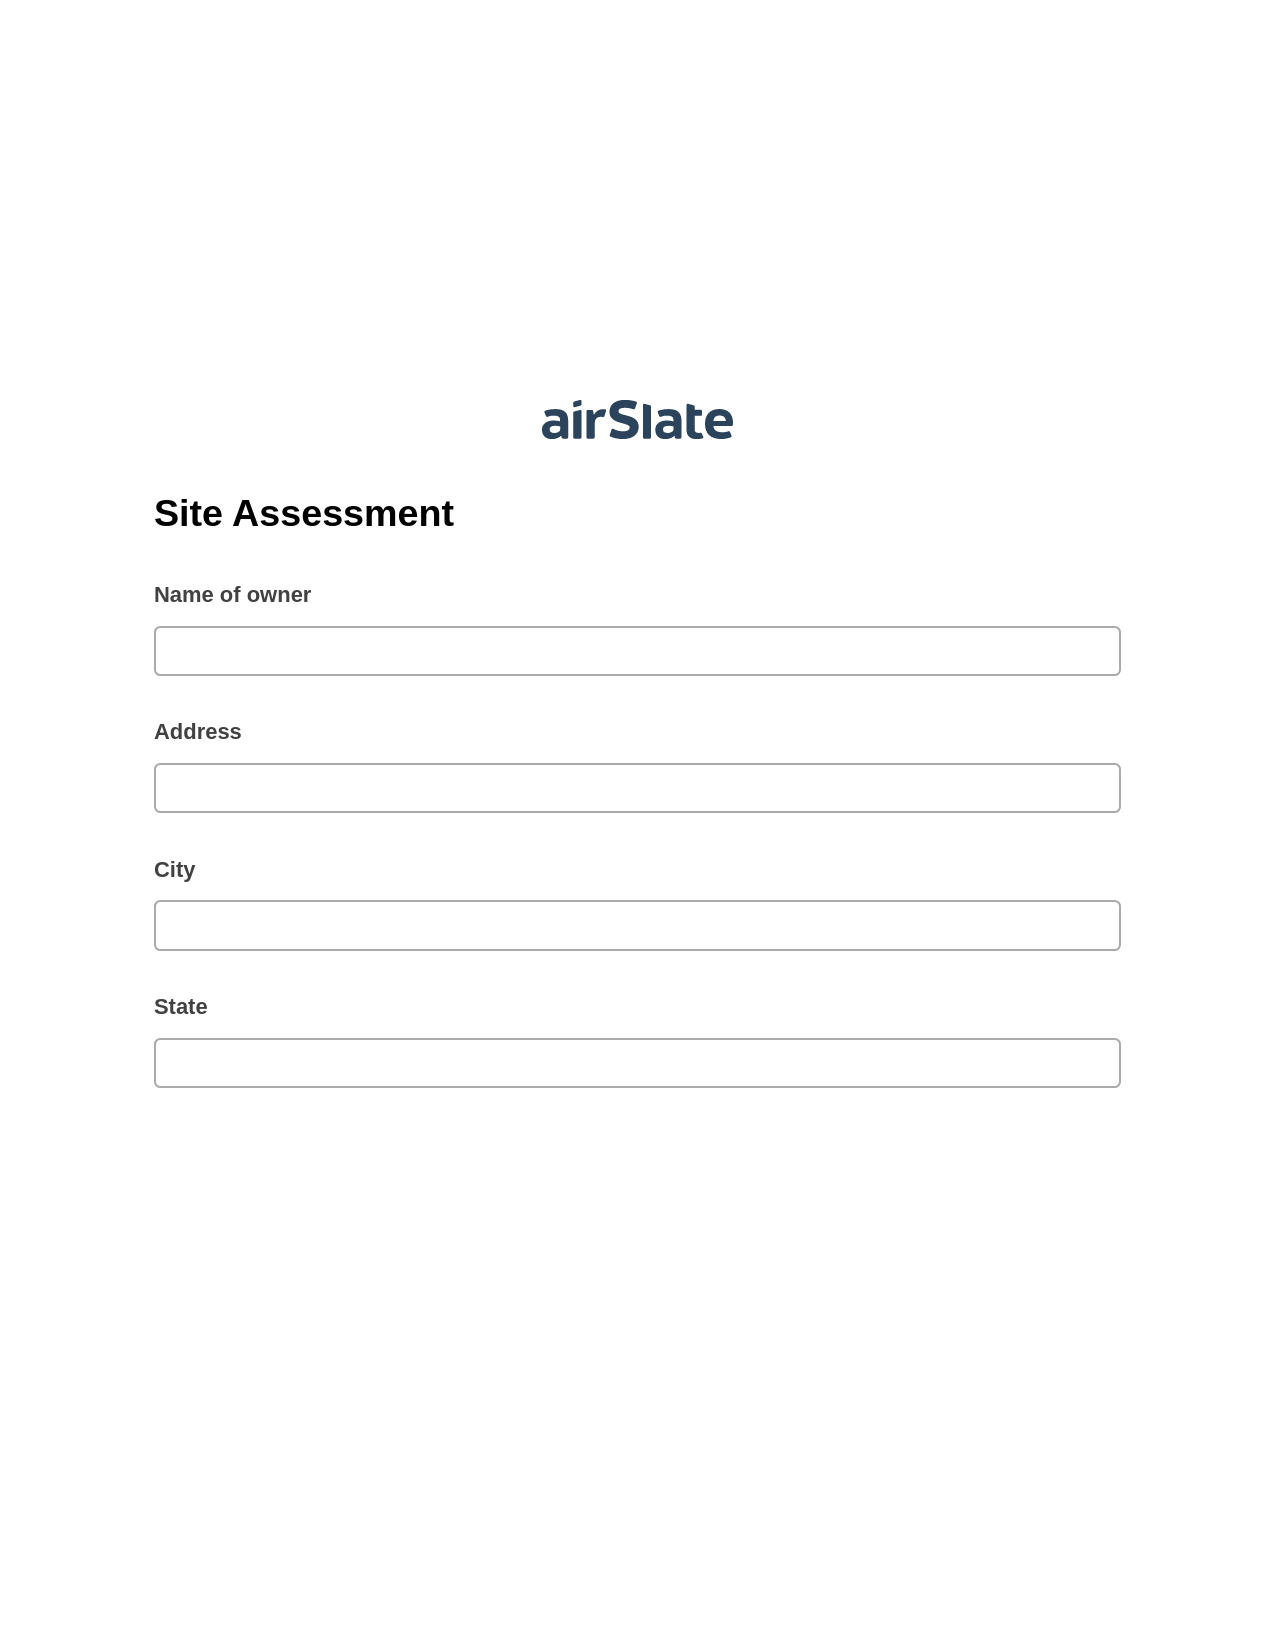 Site Assessment Pre-fill from CSV File Bot, Update NetSuite Records Bot, Export to MySQL Bot